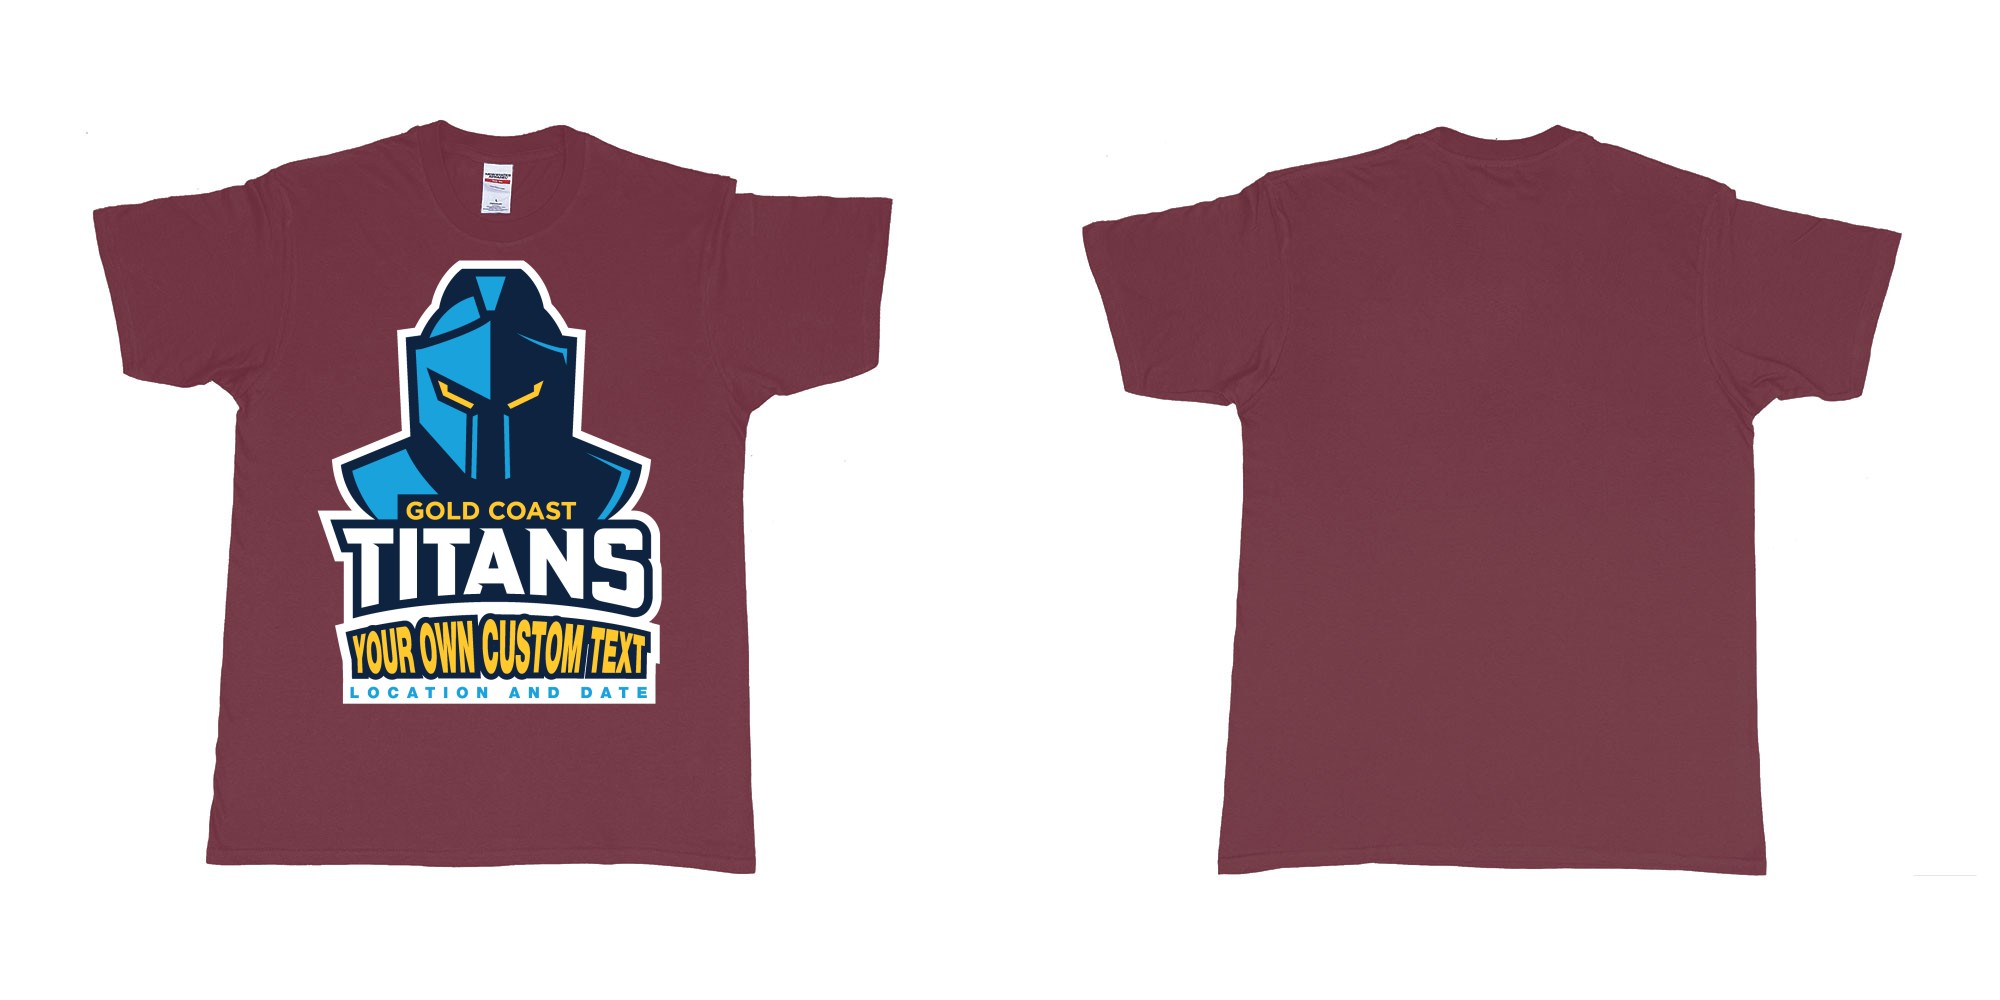 Custom tshirt design gold coast titans own custom design print in fabric color marron choice your own text made in Bali by The Pirate Way